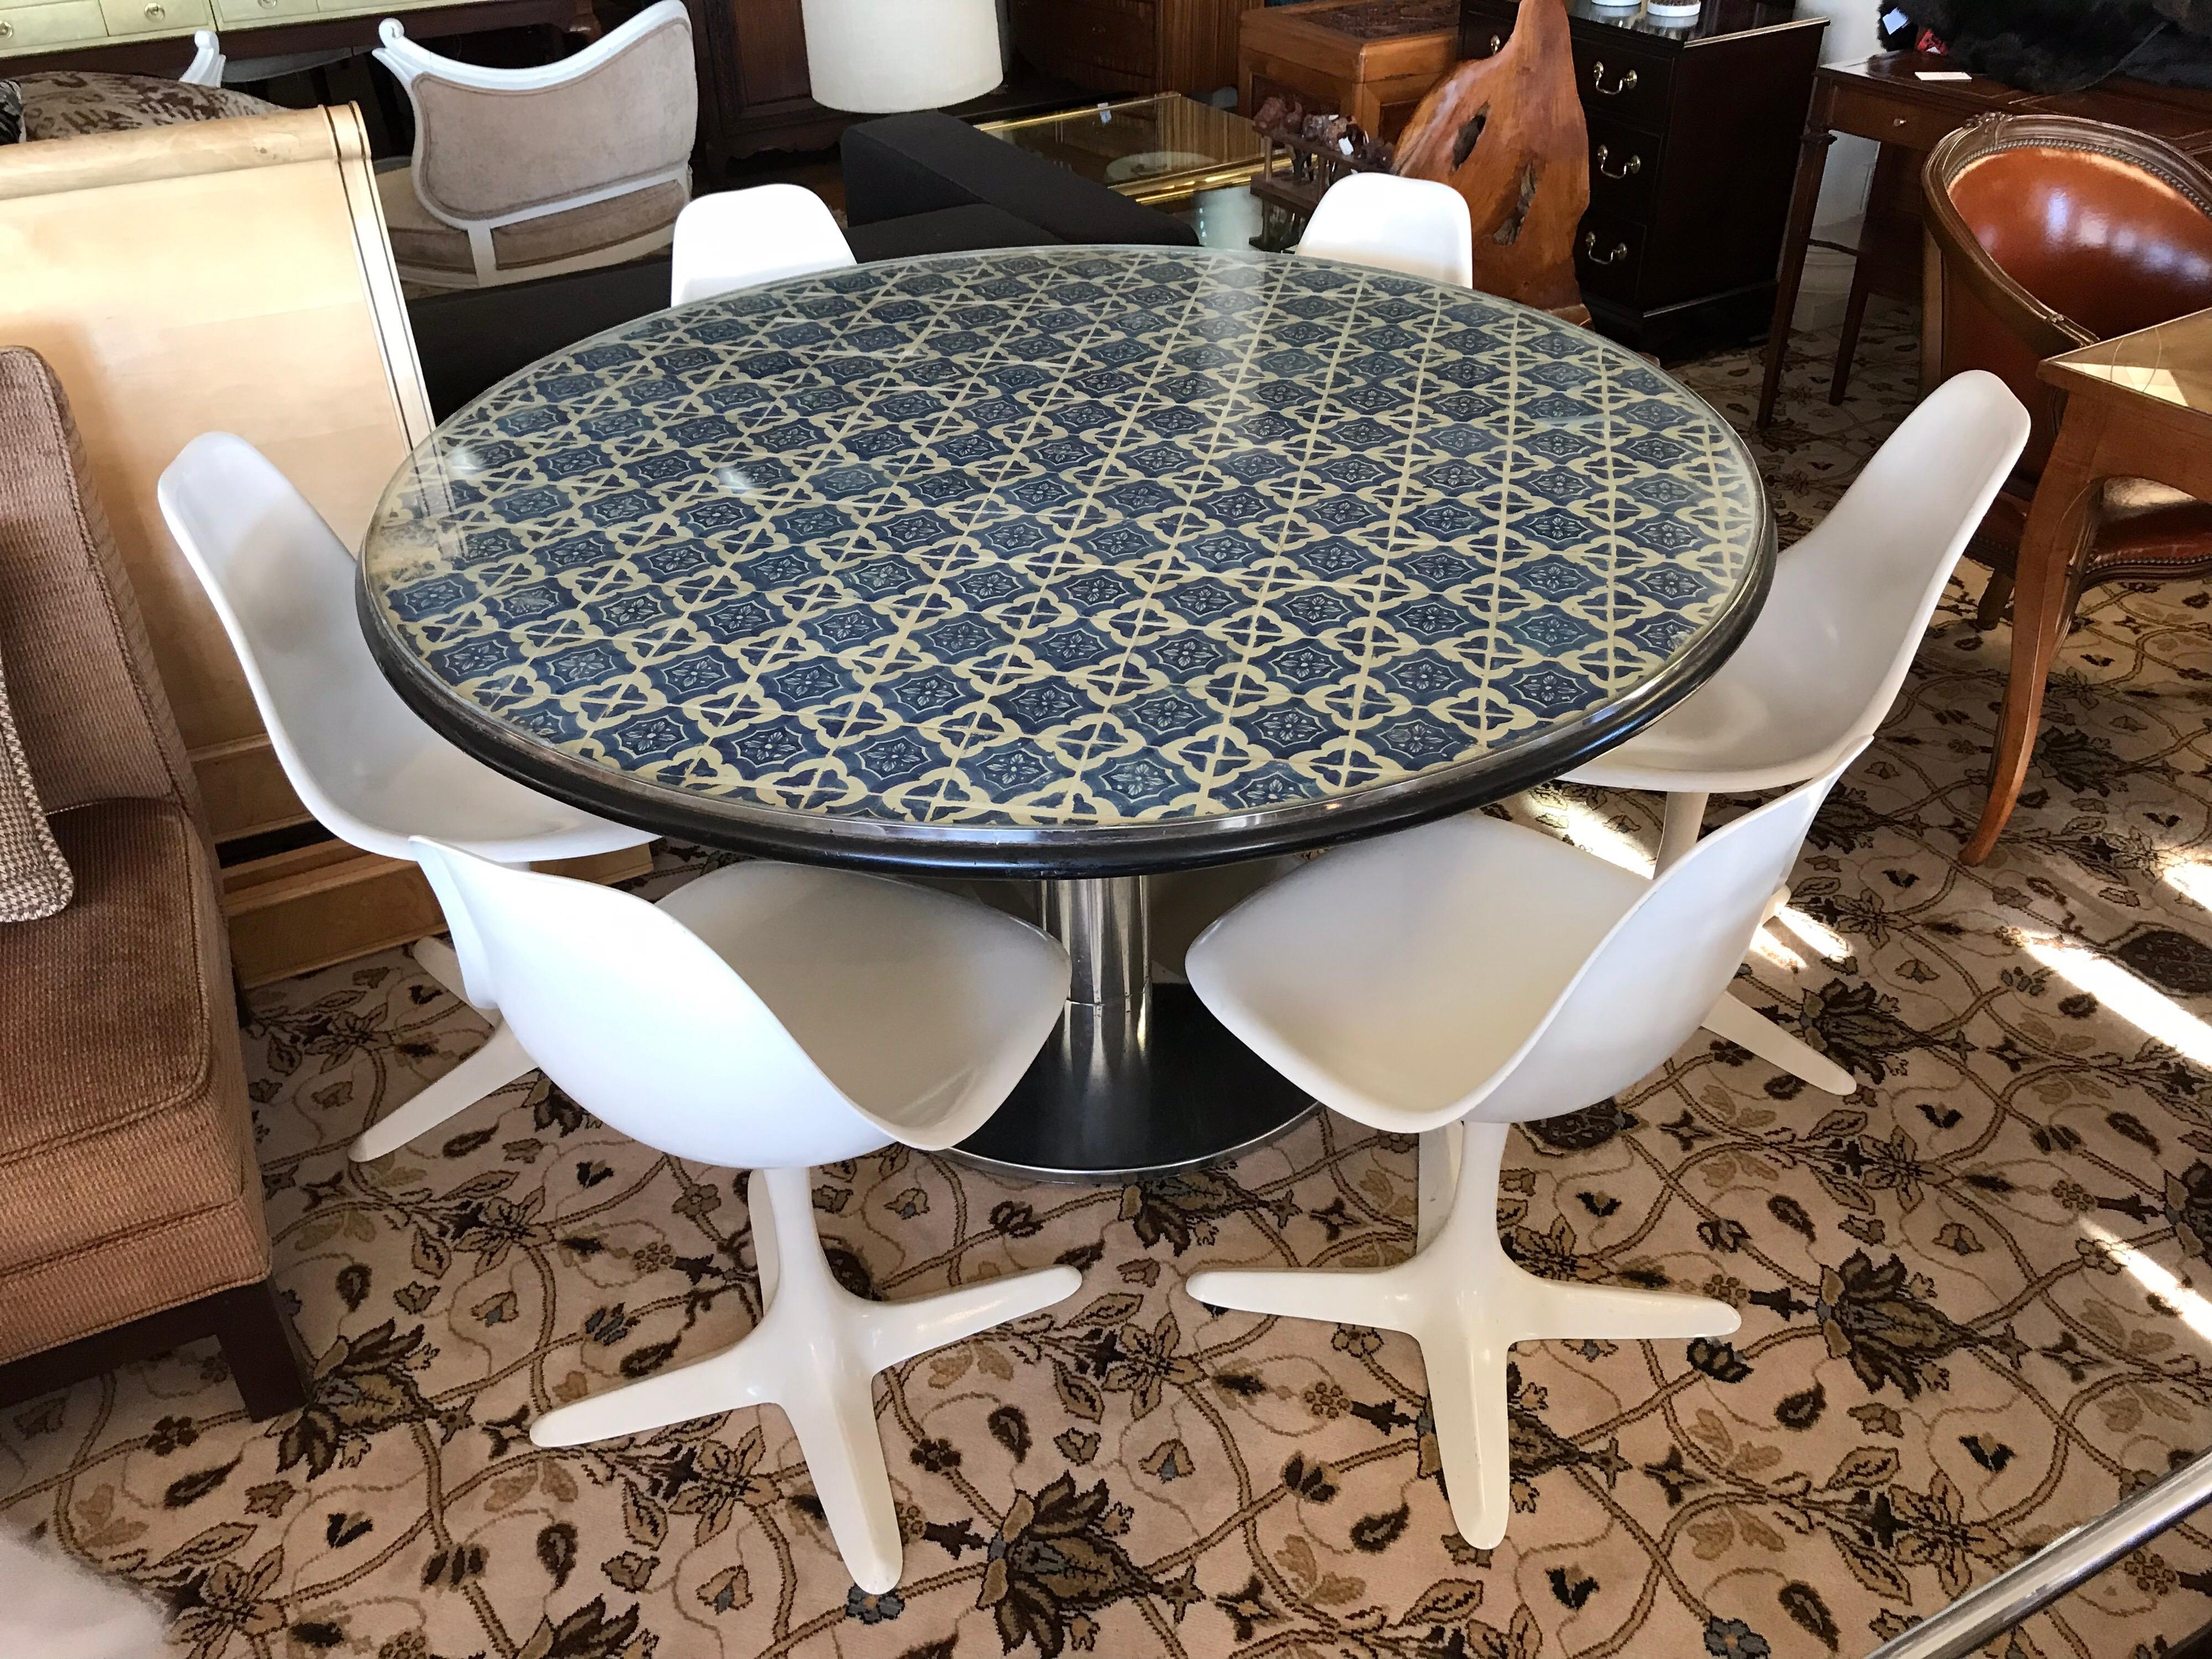 Unusual blue and white Spanish tile top mosaic table with a set of six Saarinen tulip chairs with Burke USA hallmarks. True period pieces. The table dimensions are below and the chair dimensions are 18 x 20 x 32 x 18 inch seat height. Magnificent